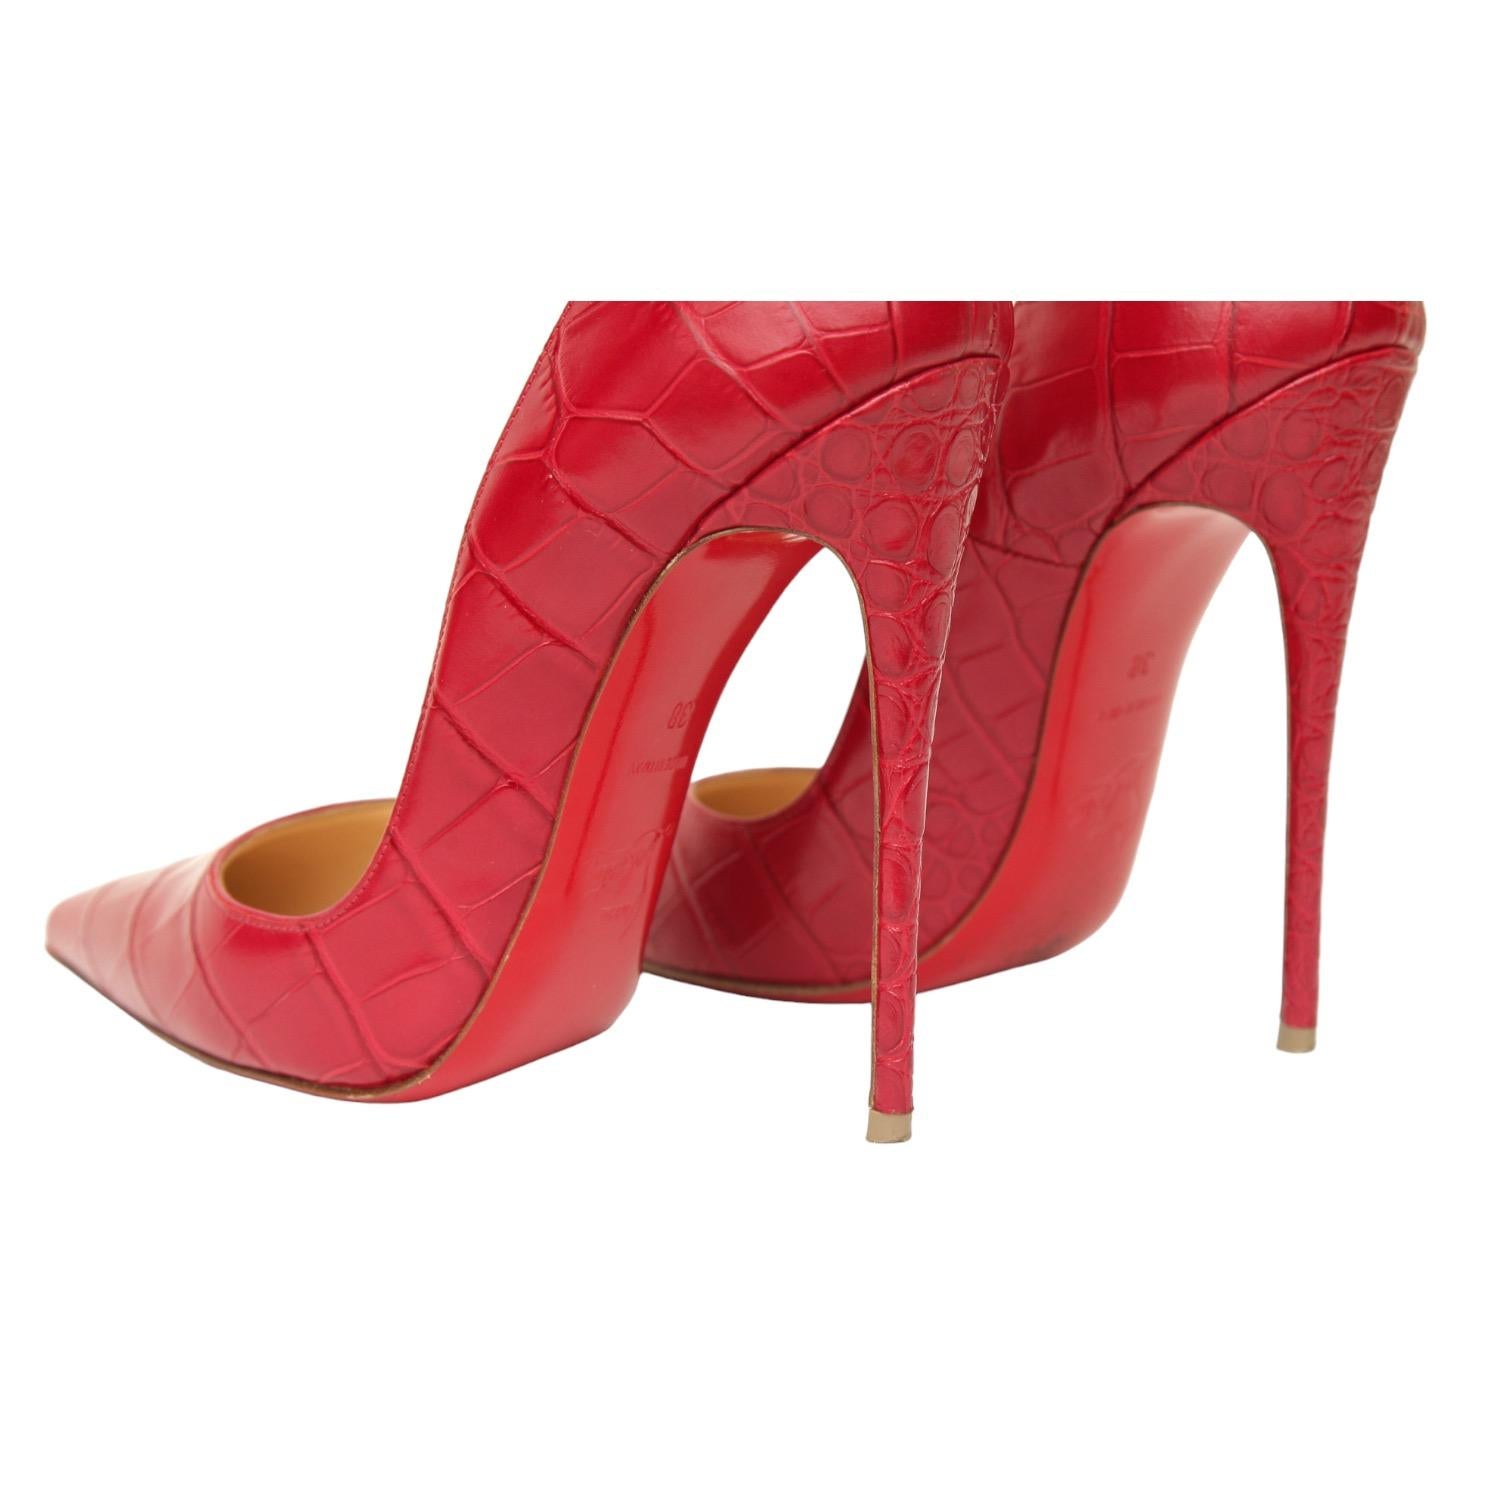 CHRISTIAN LOUBOUTIN So Kate 120 Red Pink Faux Croc Leather Pump Pointed Toe 38 For Sale 3